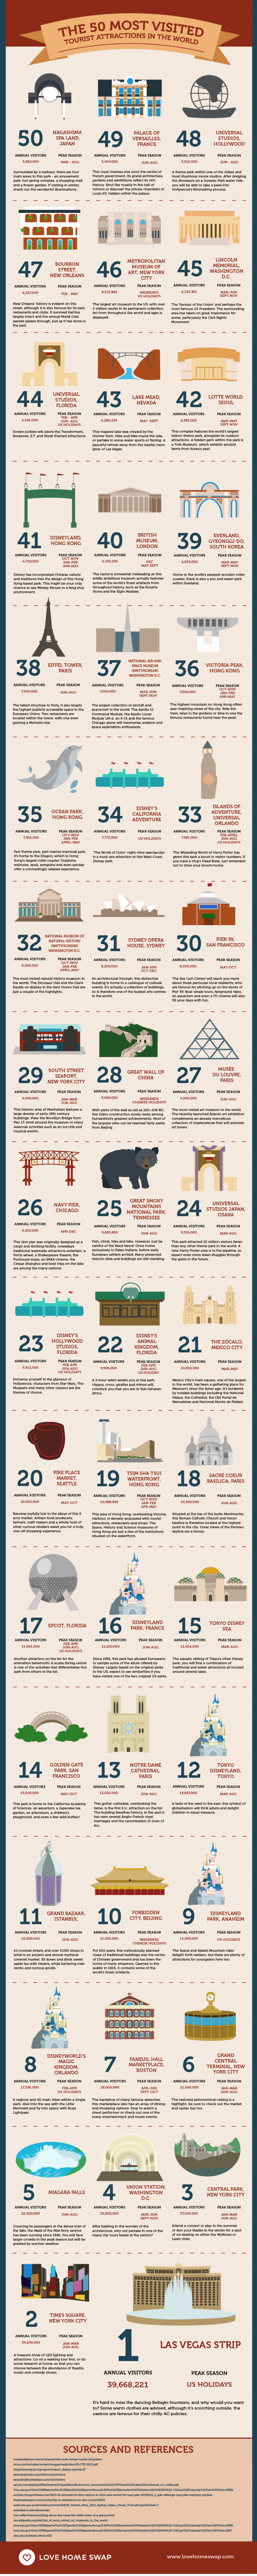 50 Most Visited Tourist Attractions In The World - AspirantSG